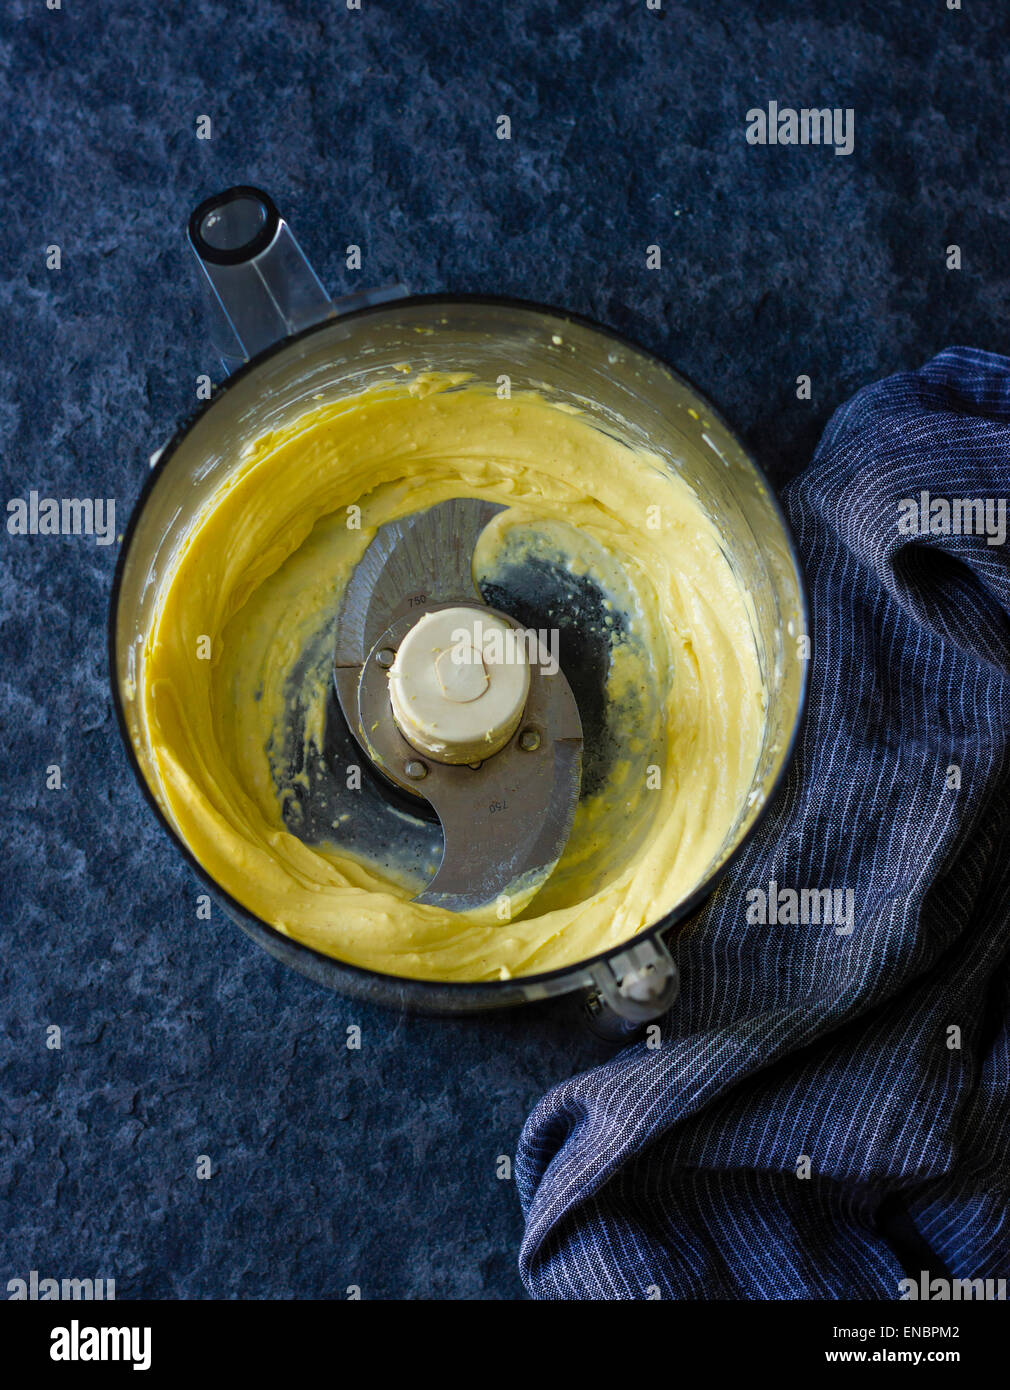 Food processor with butter Stock Photo